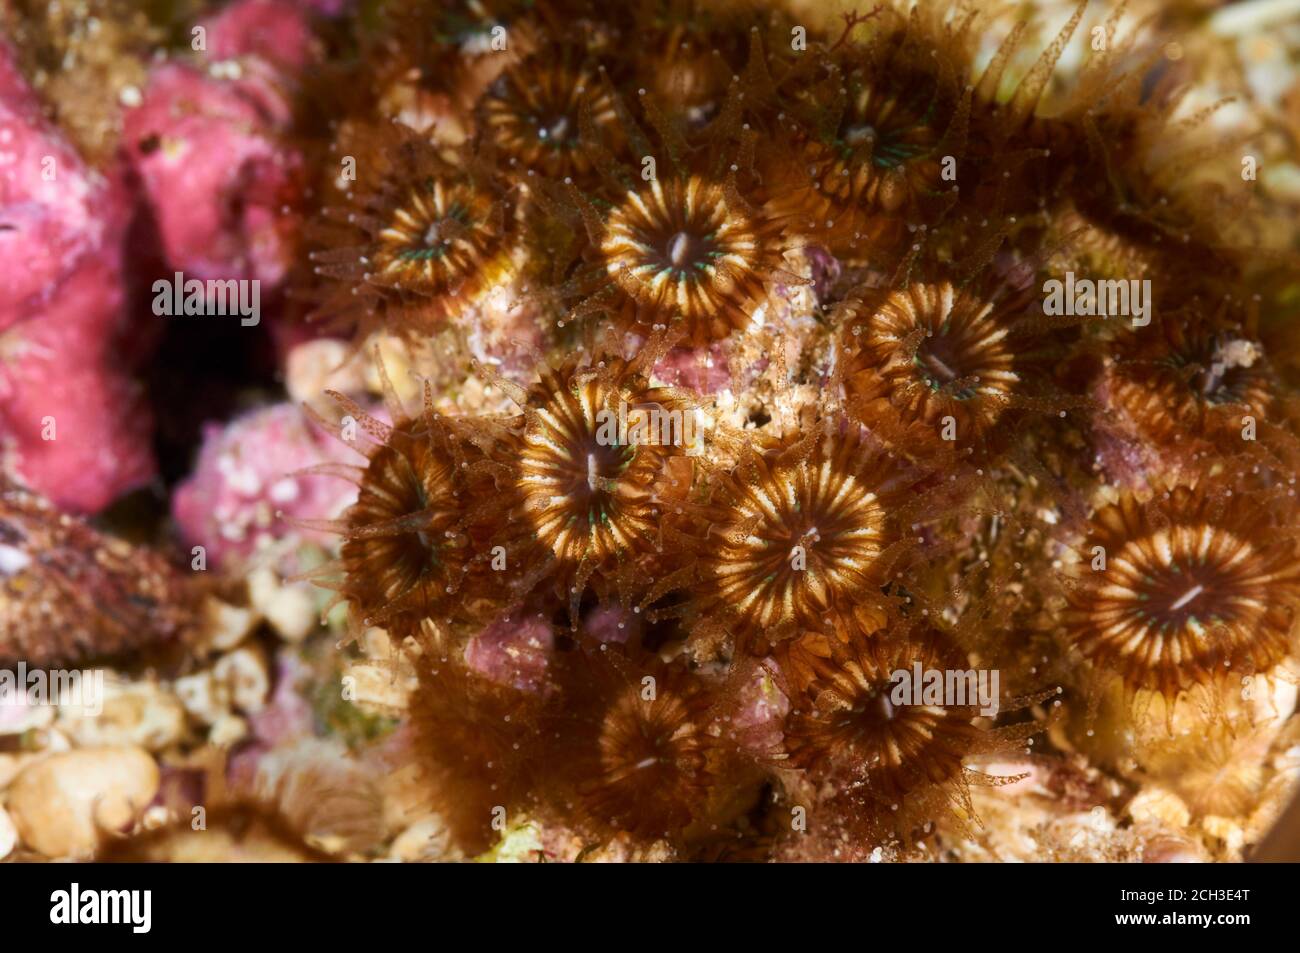 Underwater closeup of a stony coral Polycyathus muellerae colony in Ses Salines Natural Park (Formentera, Balearic Islands, Mediterranean sea, Spain) Stock Photo